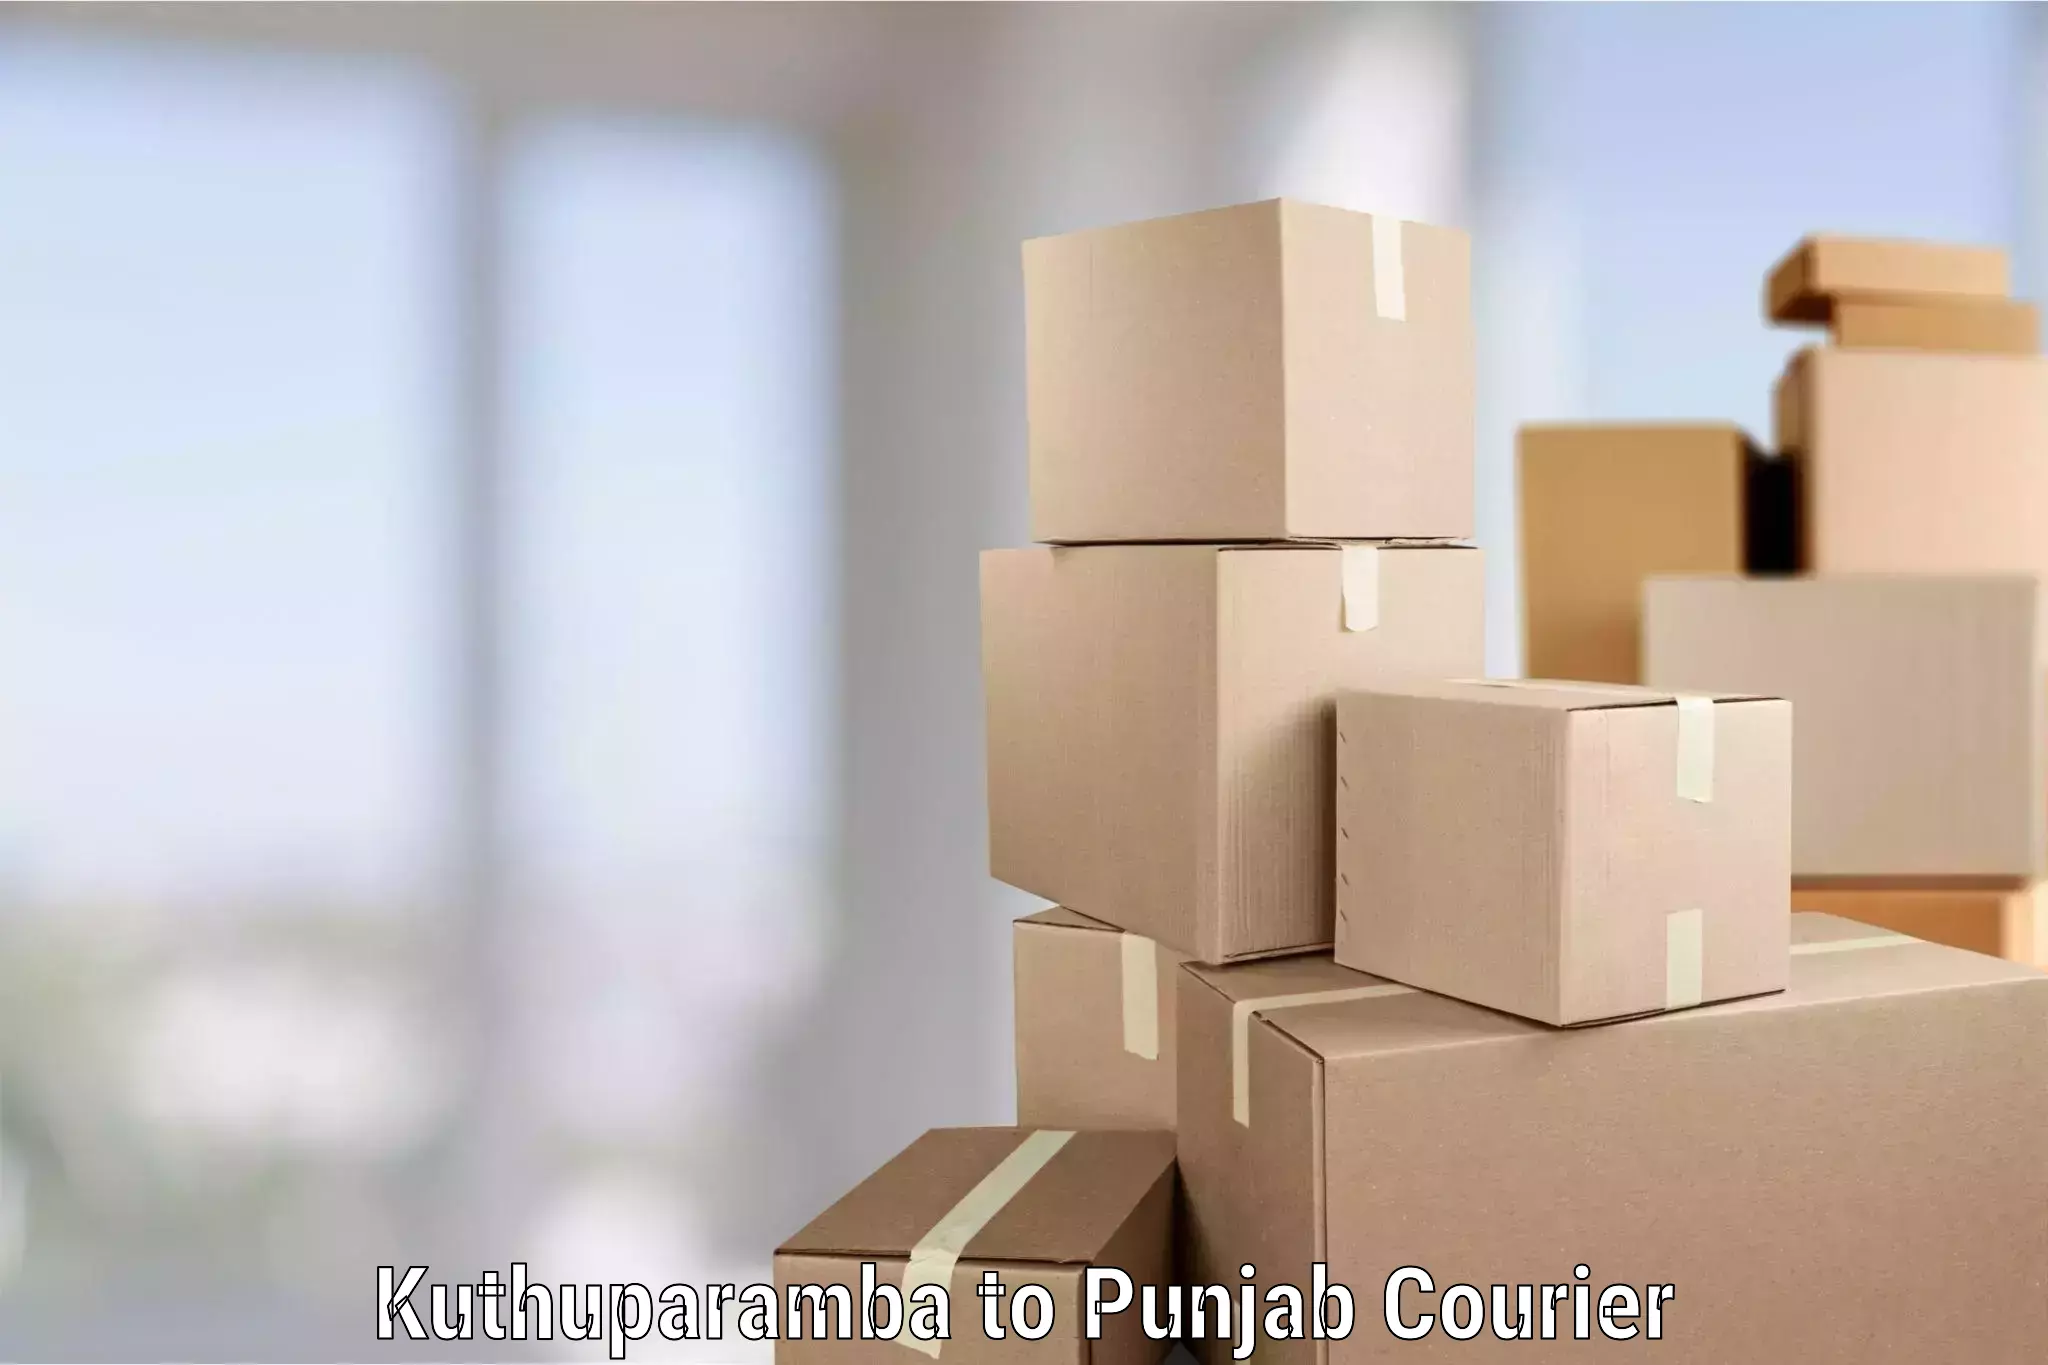 Trusted home movers in Kuthuparamba to Punjab